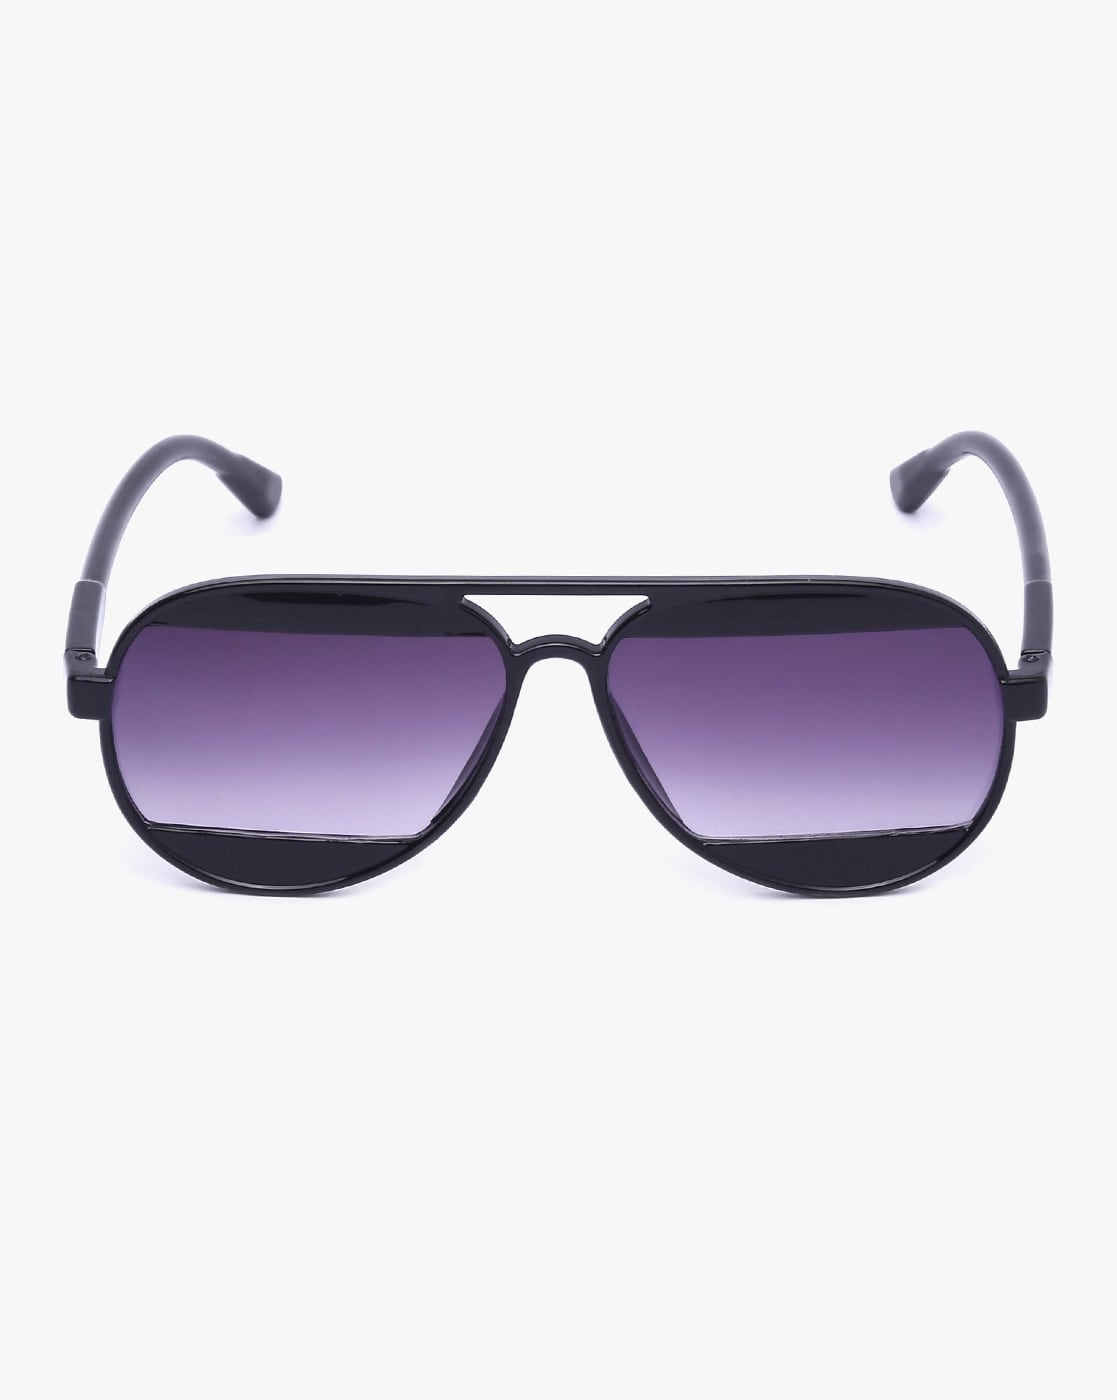 ASOS Round Sunglasses In Gold Metal With Purple Lens | ASOS